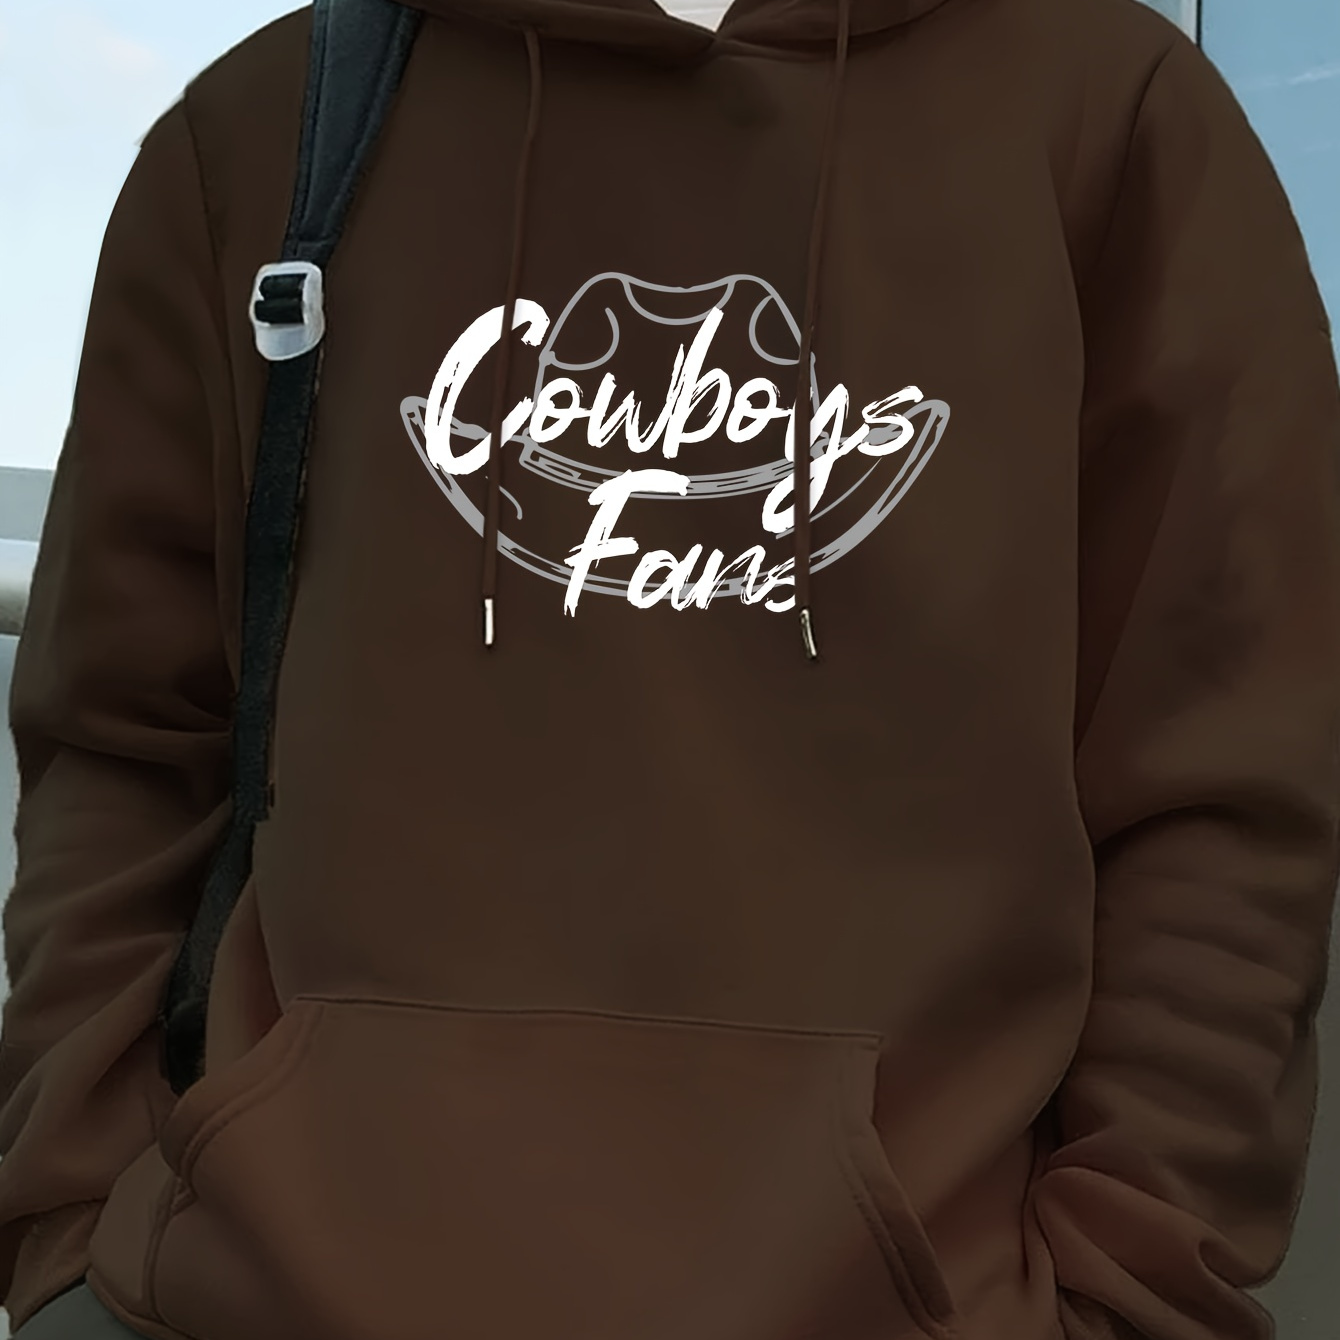 

Cowboys Fans Pattern Print Hooded Sweatshirt, Hoodies Fashion Casual Tops For Spring Autumn, Men's Daily Life Outwear